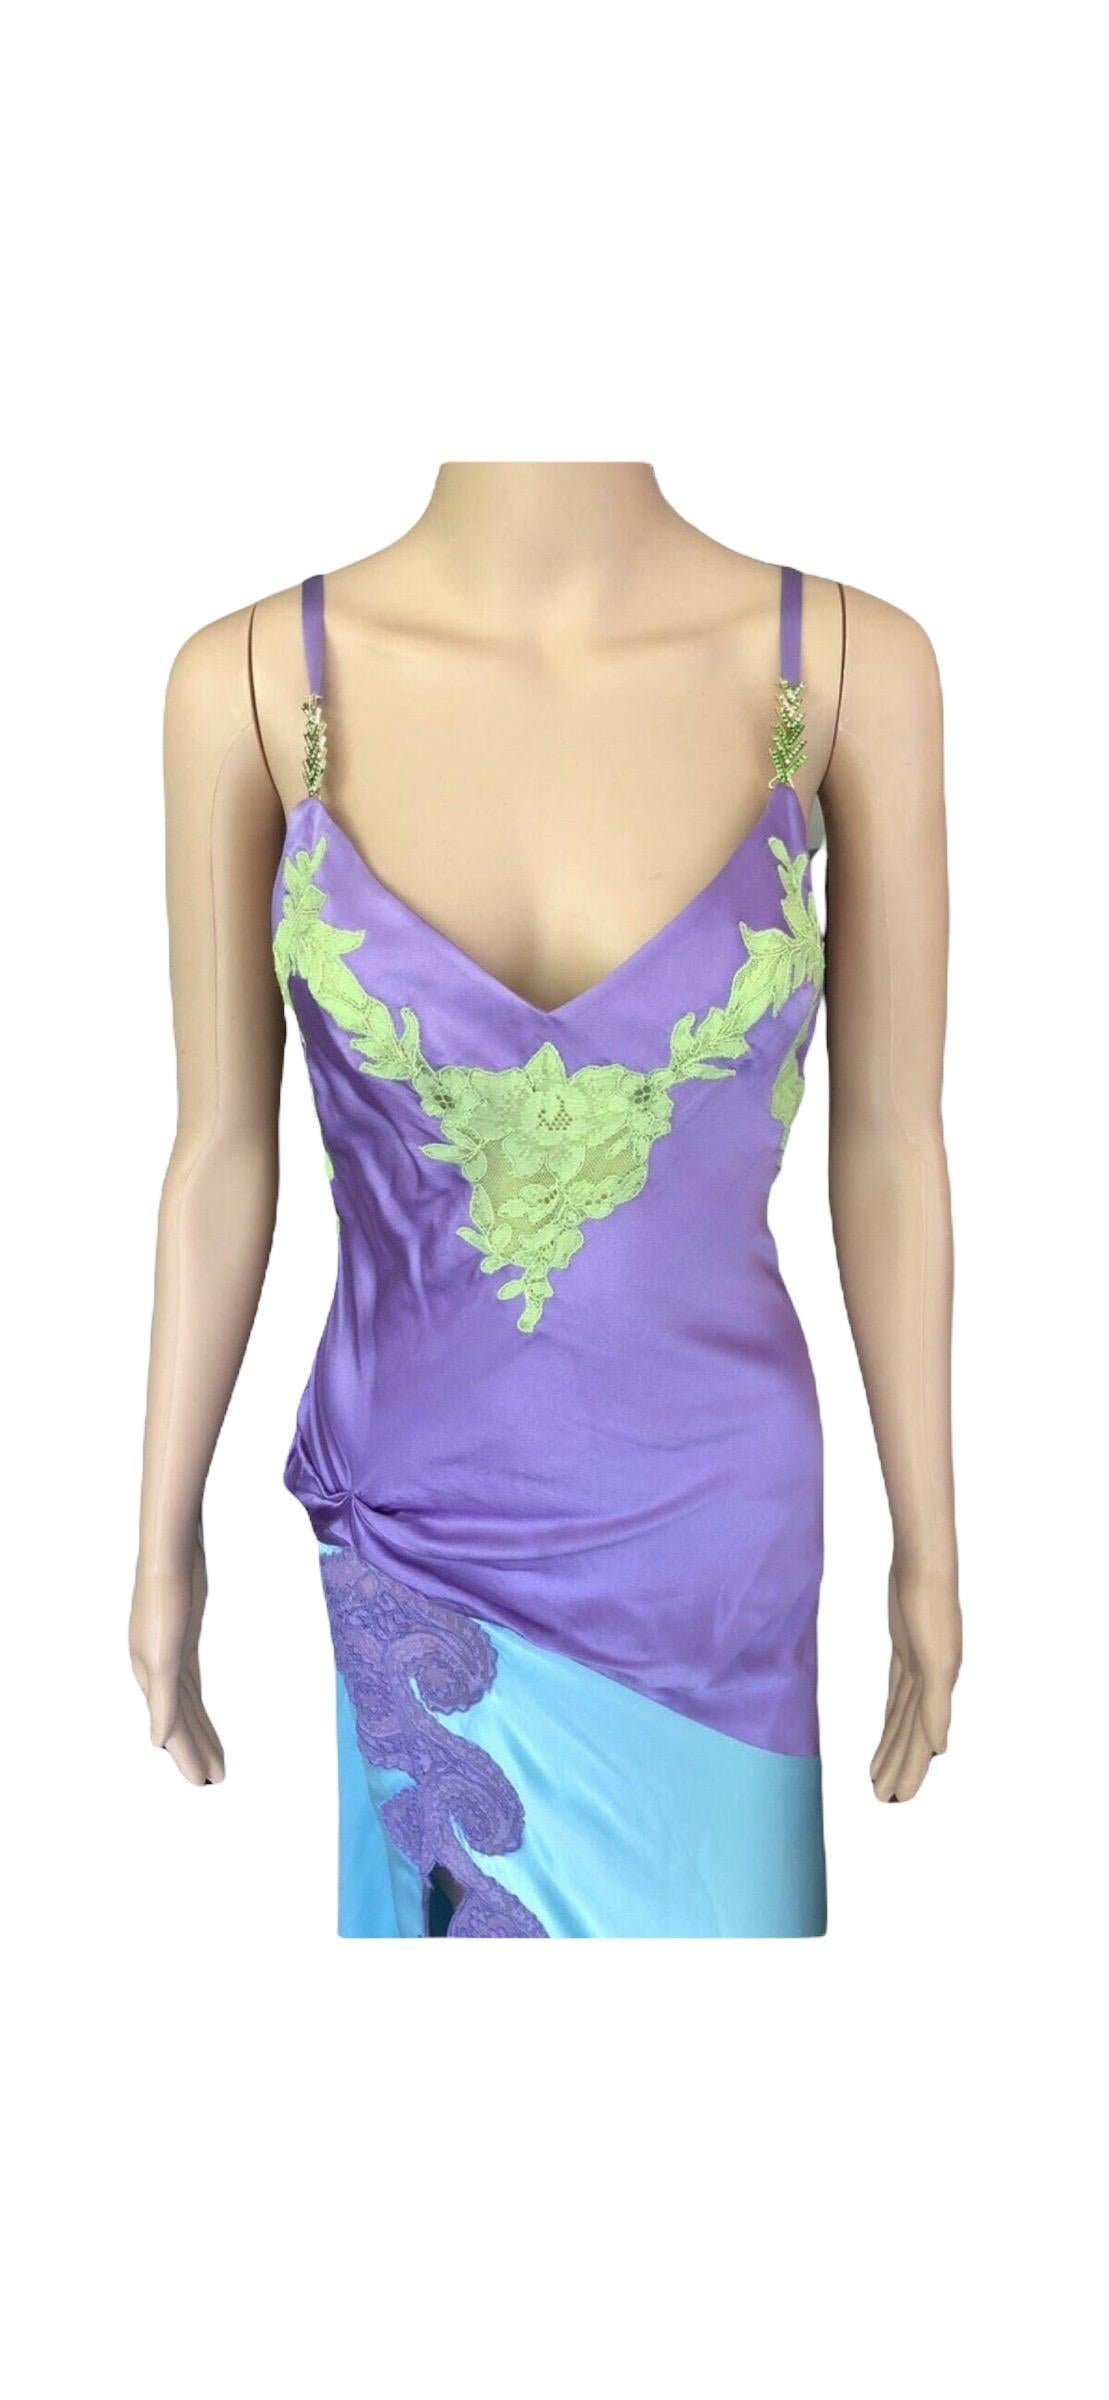 Gianni Versace F/W 1996 Runway Vintage Iconic Silk Dress Gown  For Sale 5